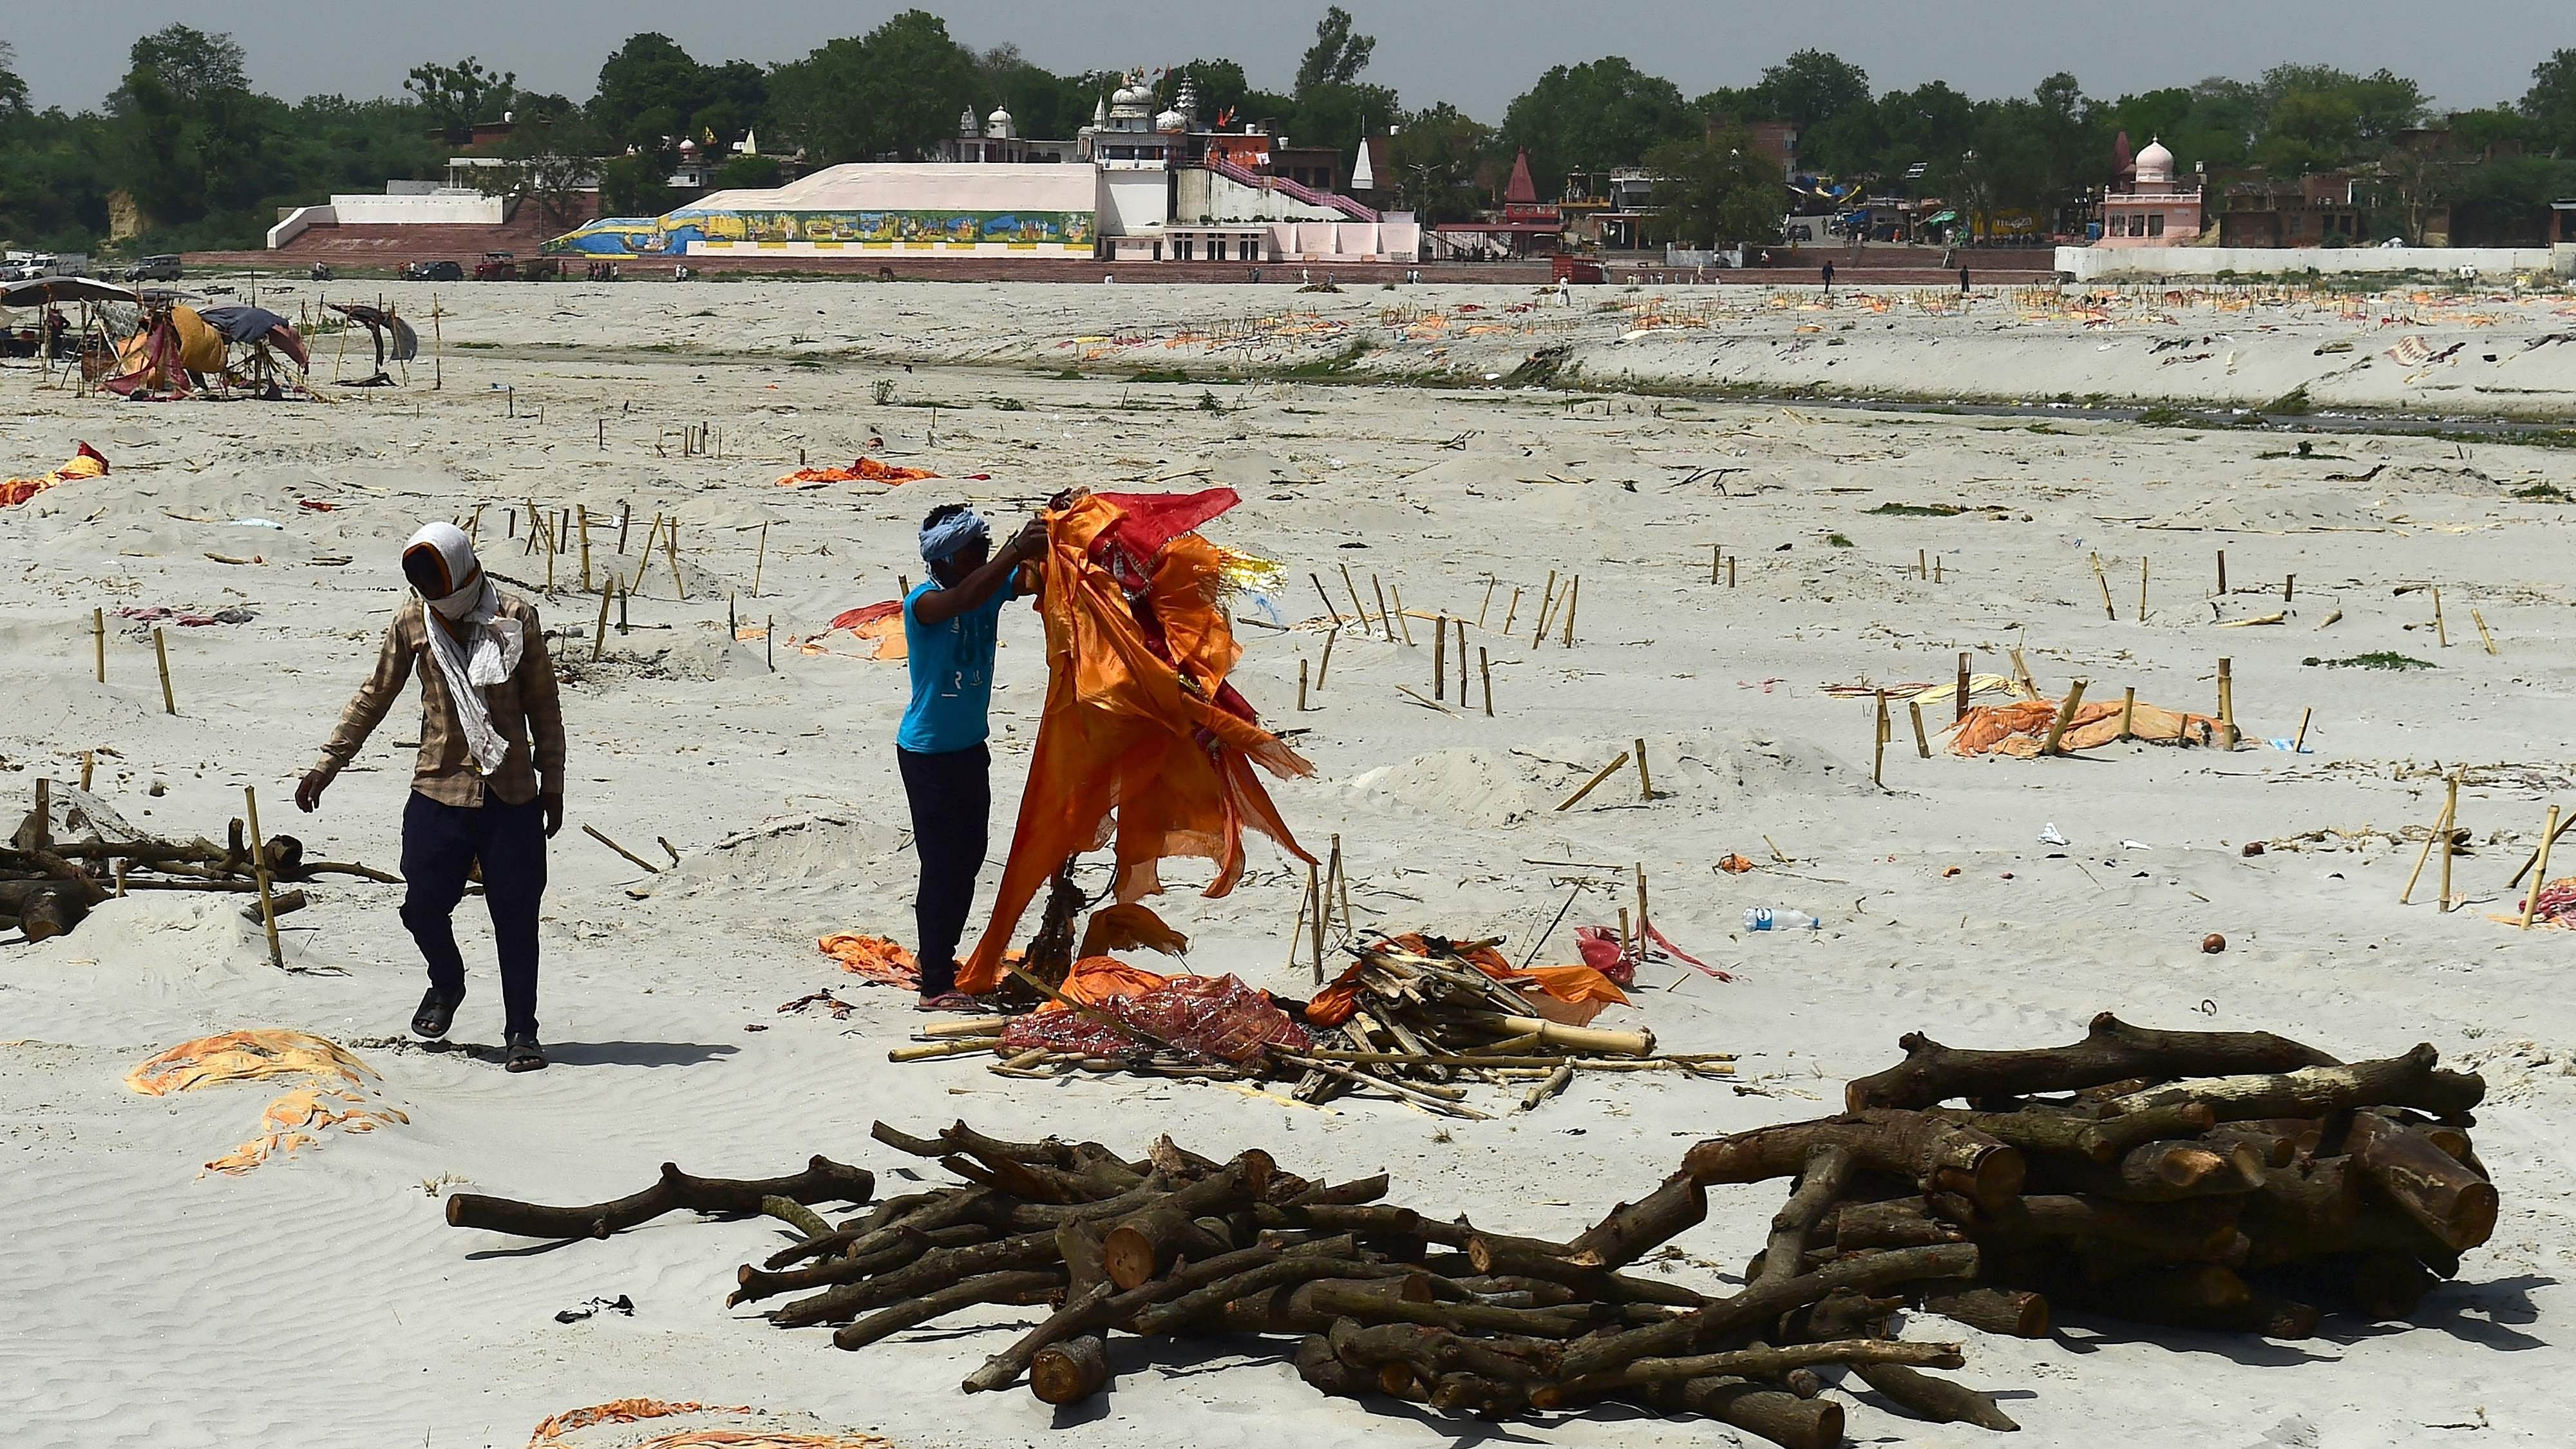 Workers remove saffron cloths of dead bodies buried in the sand near a cremation ground on the banks of the Ganga. Credit: AFP Photo